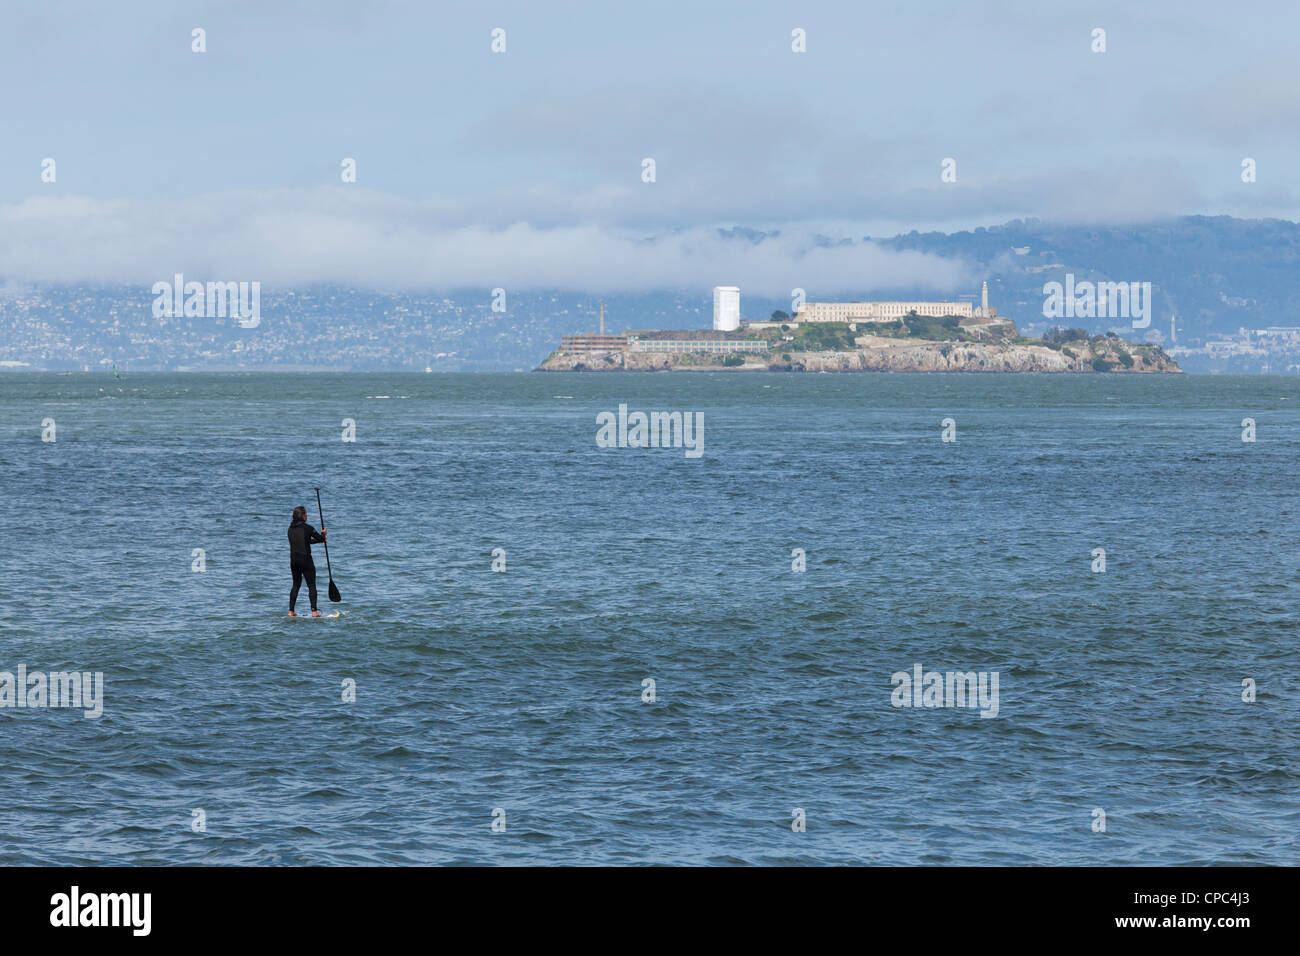 A paddle board surfer on the San Francisco bay Stock Photo